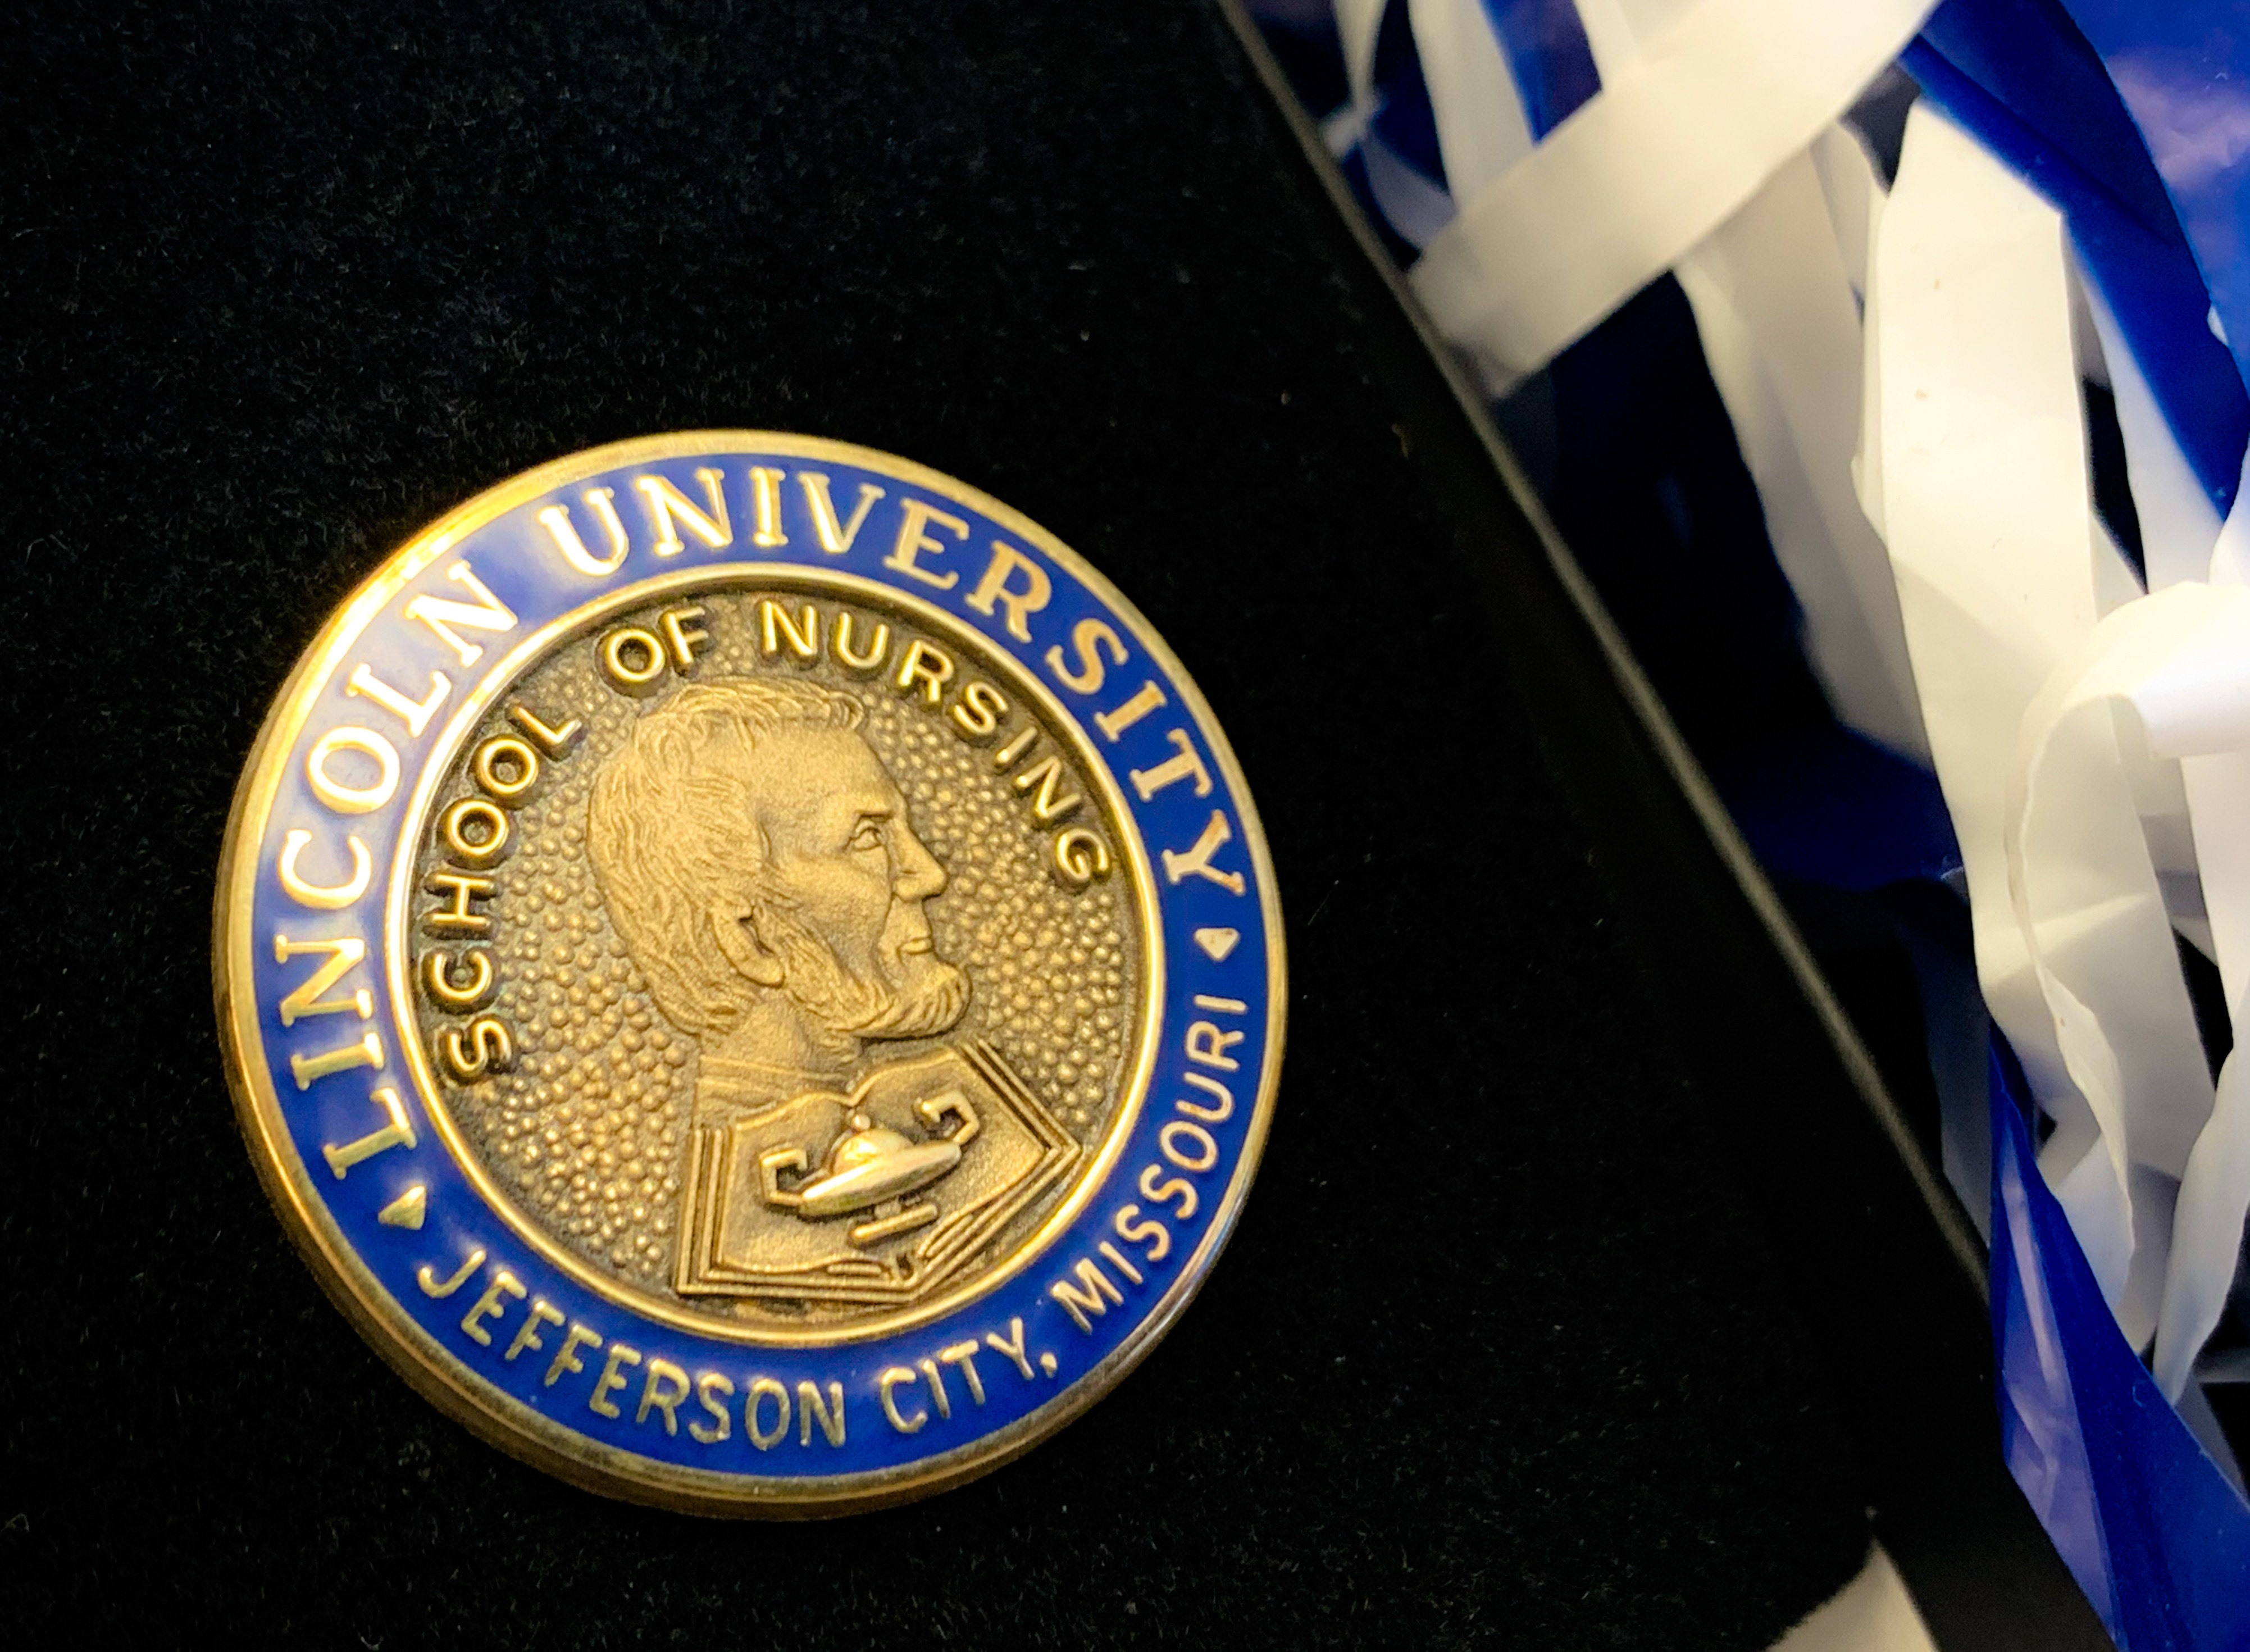 Nursing students receive a pin to mark the beginning of their healthcare careers.